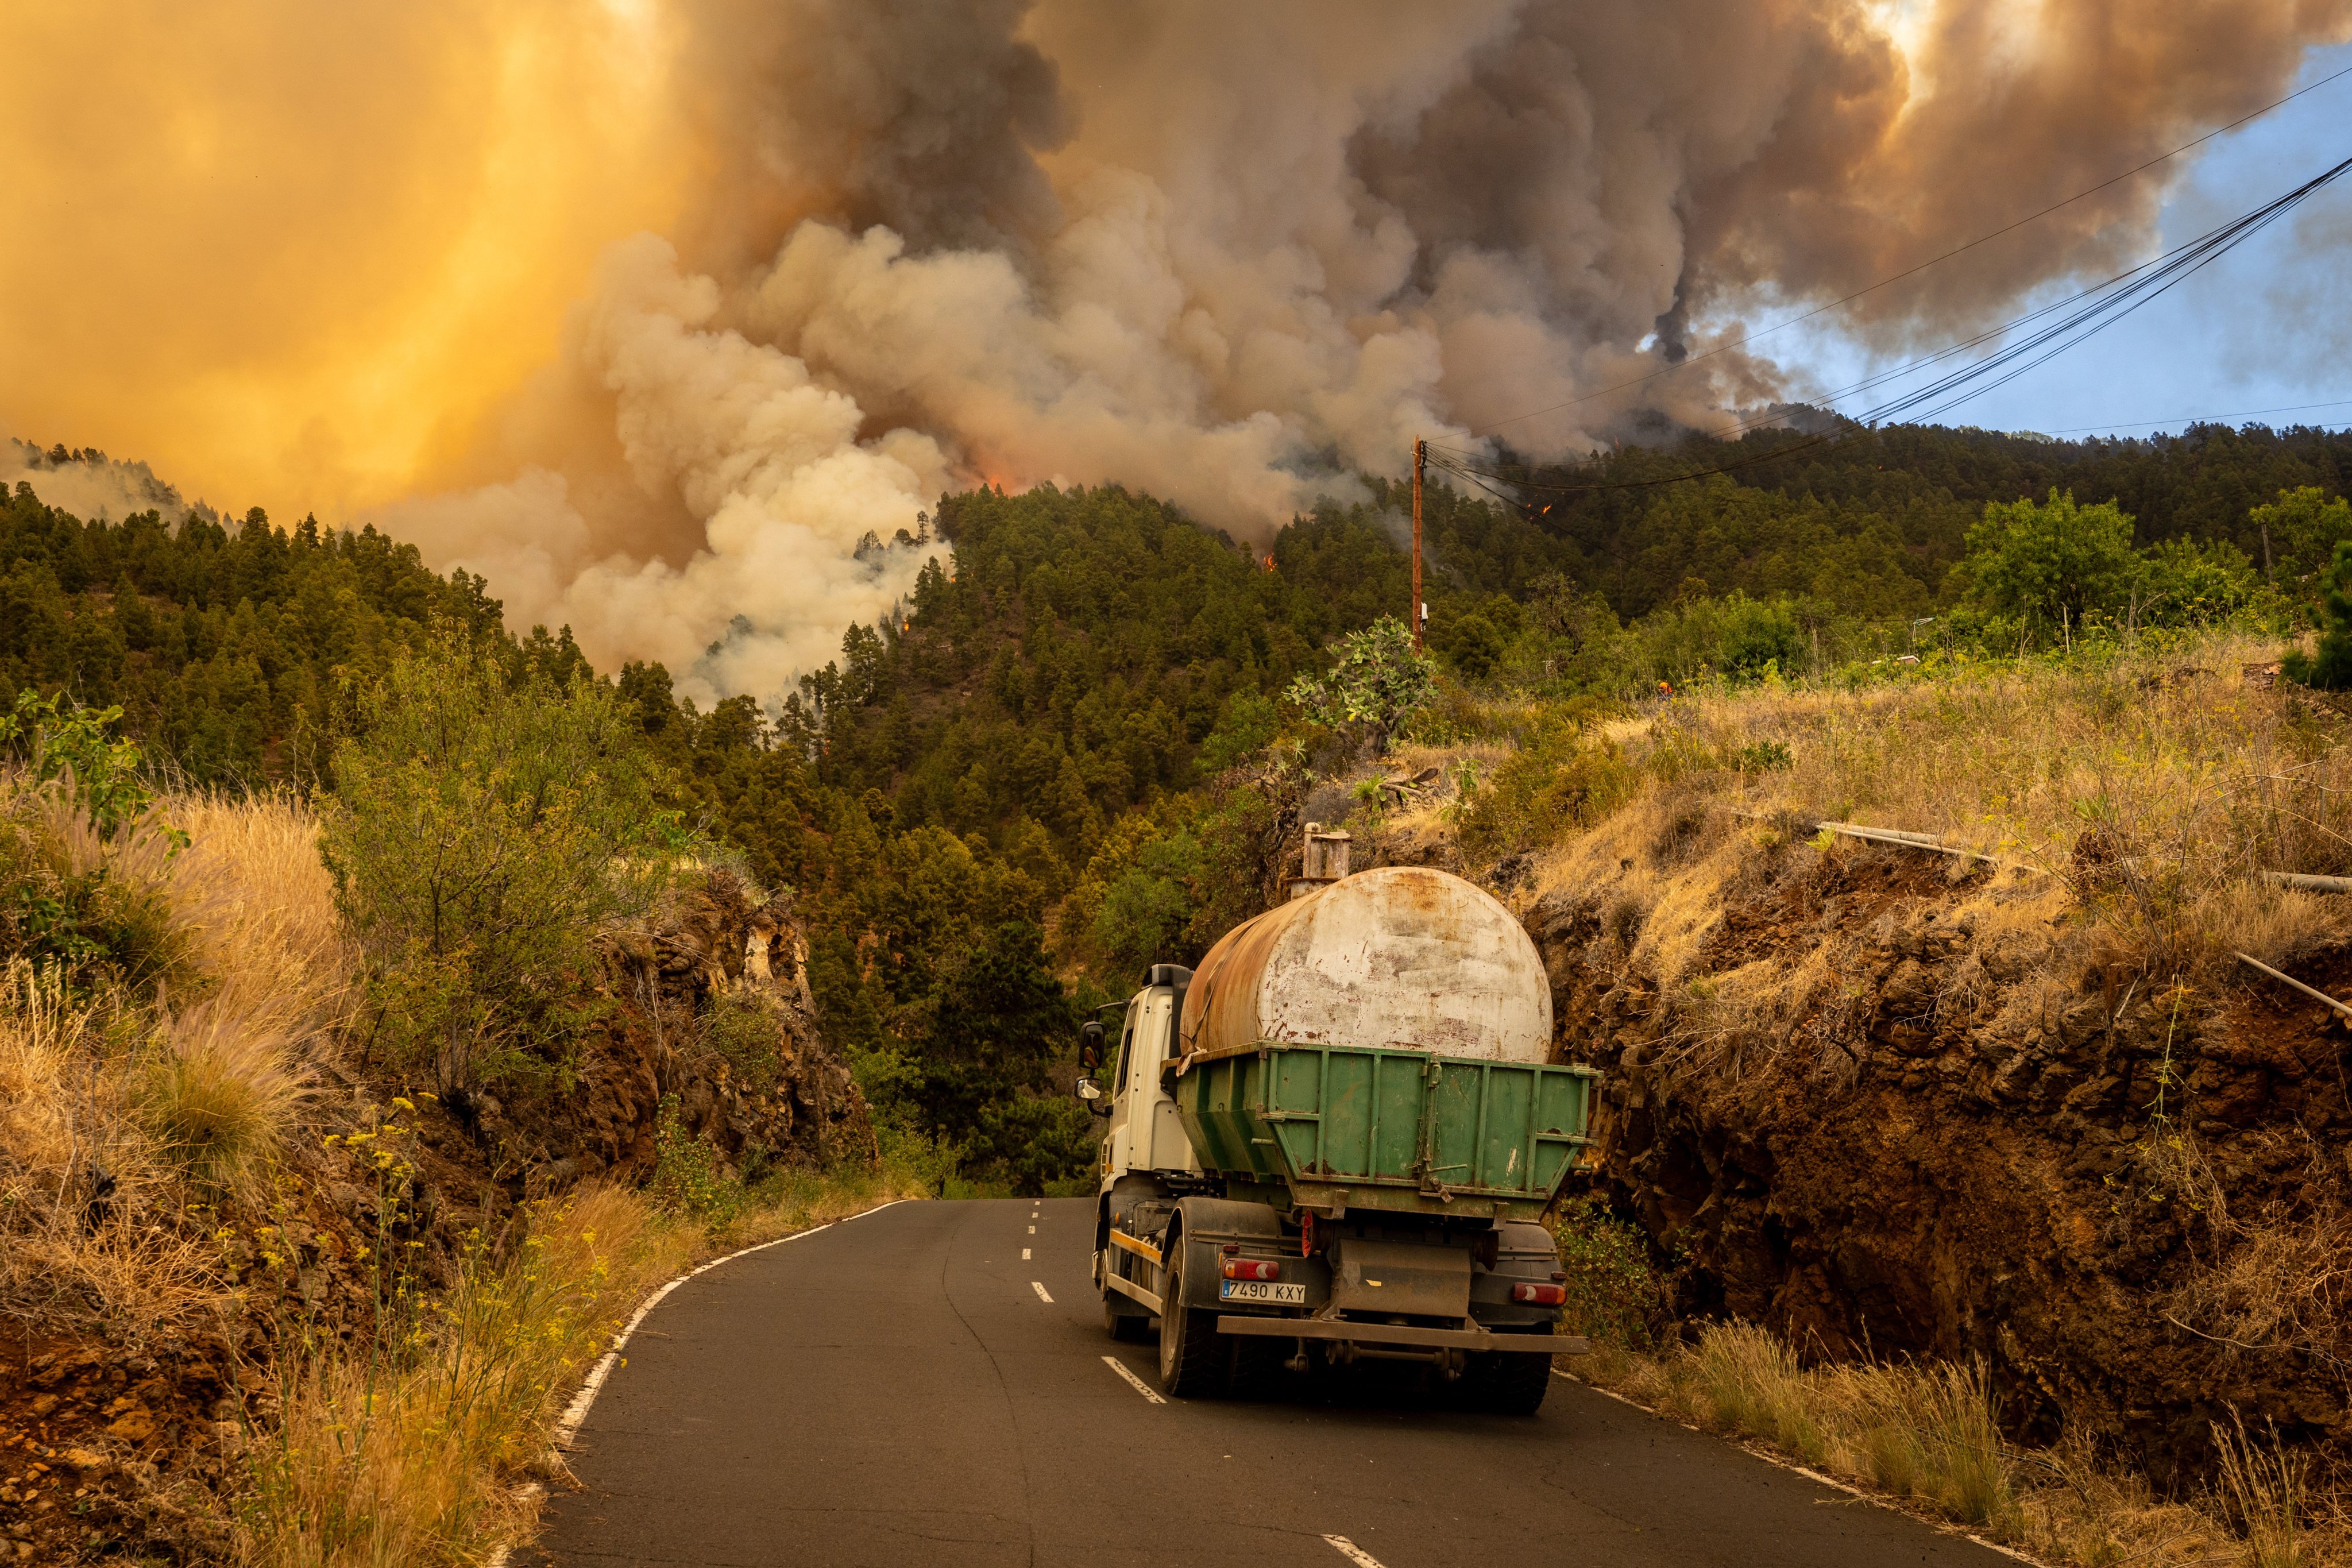 A tanker truck waits as smoke billows from a fire in La Palma, Canary Islands, Spain on Saturday. Photo: Europa Press / dpa